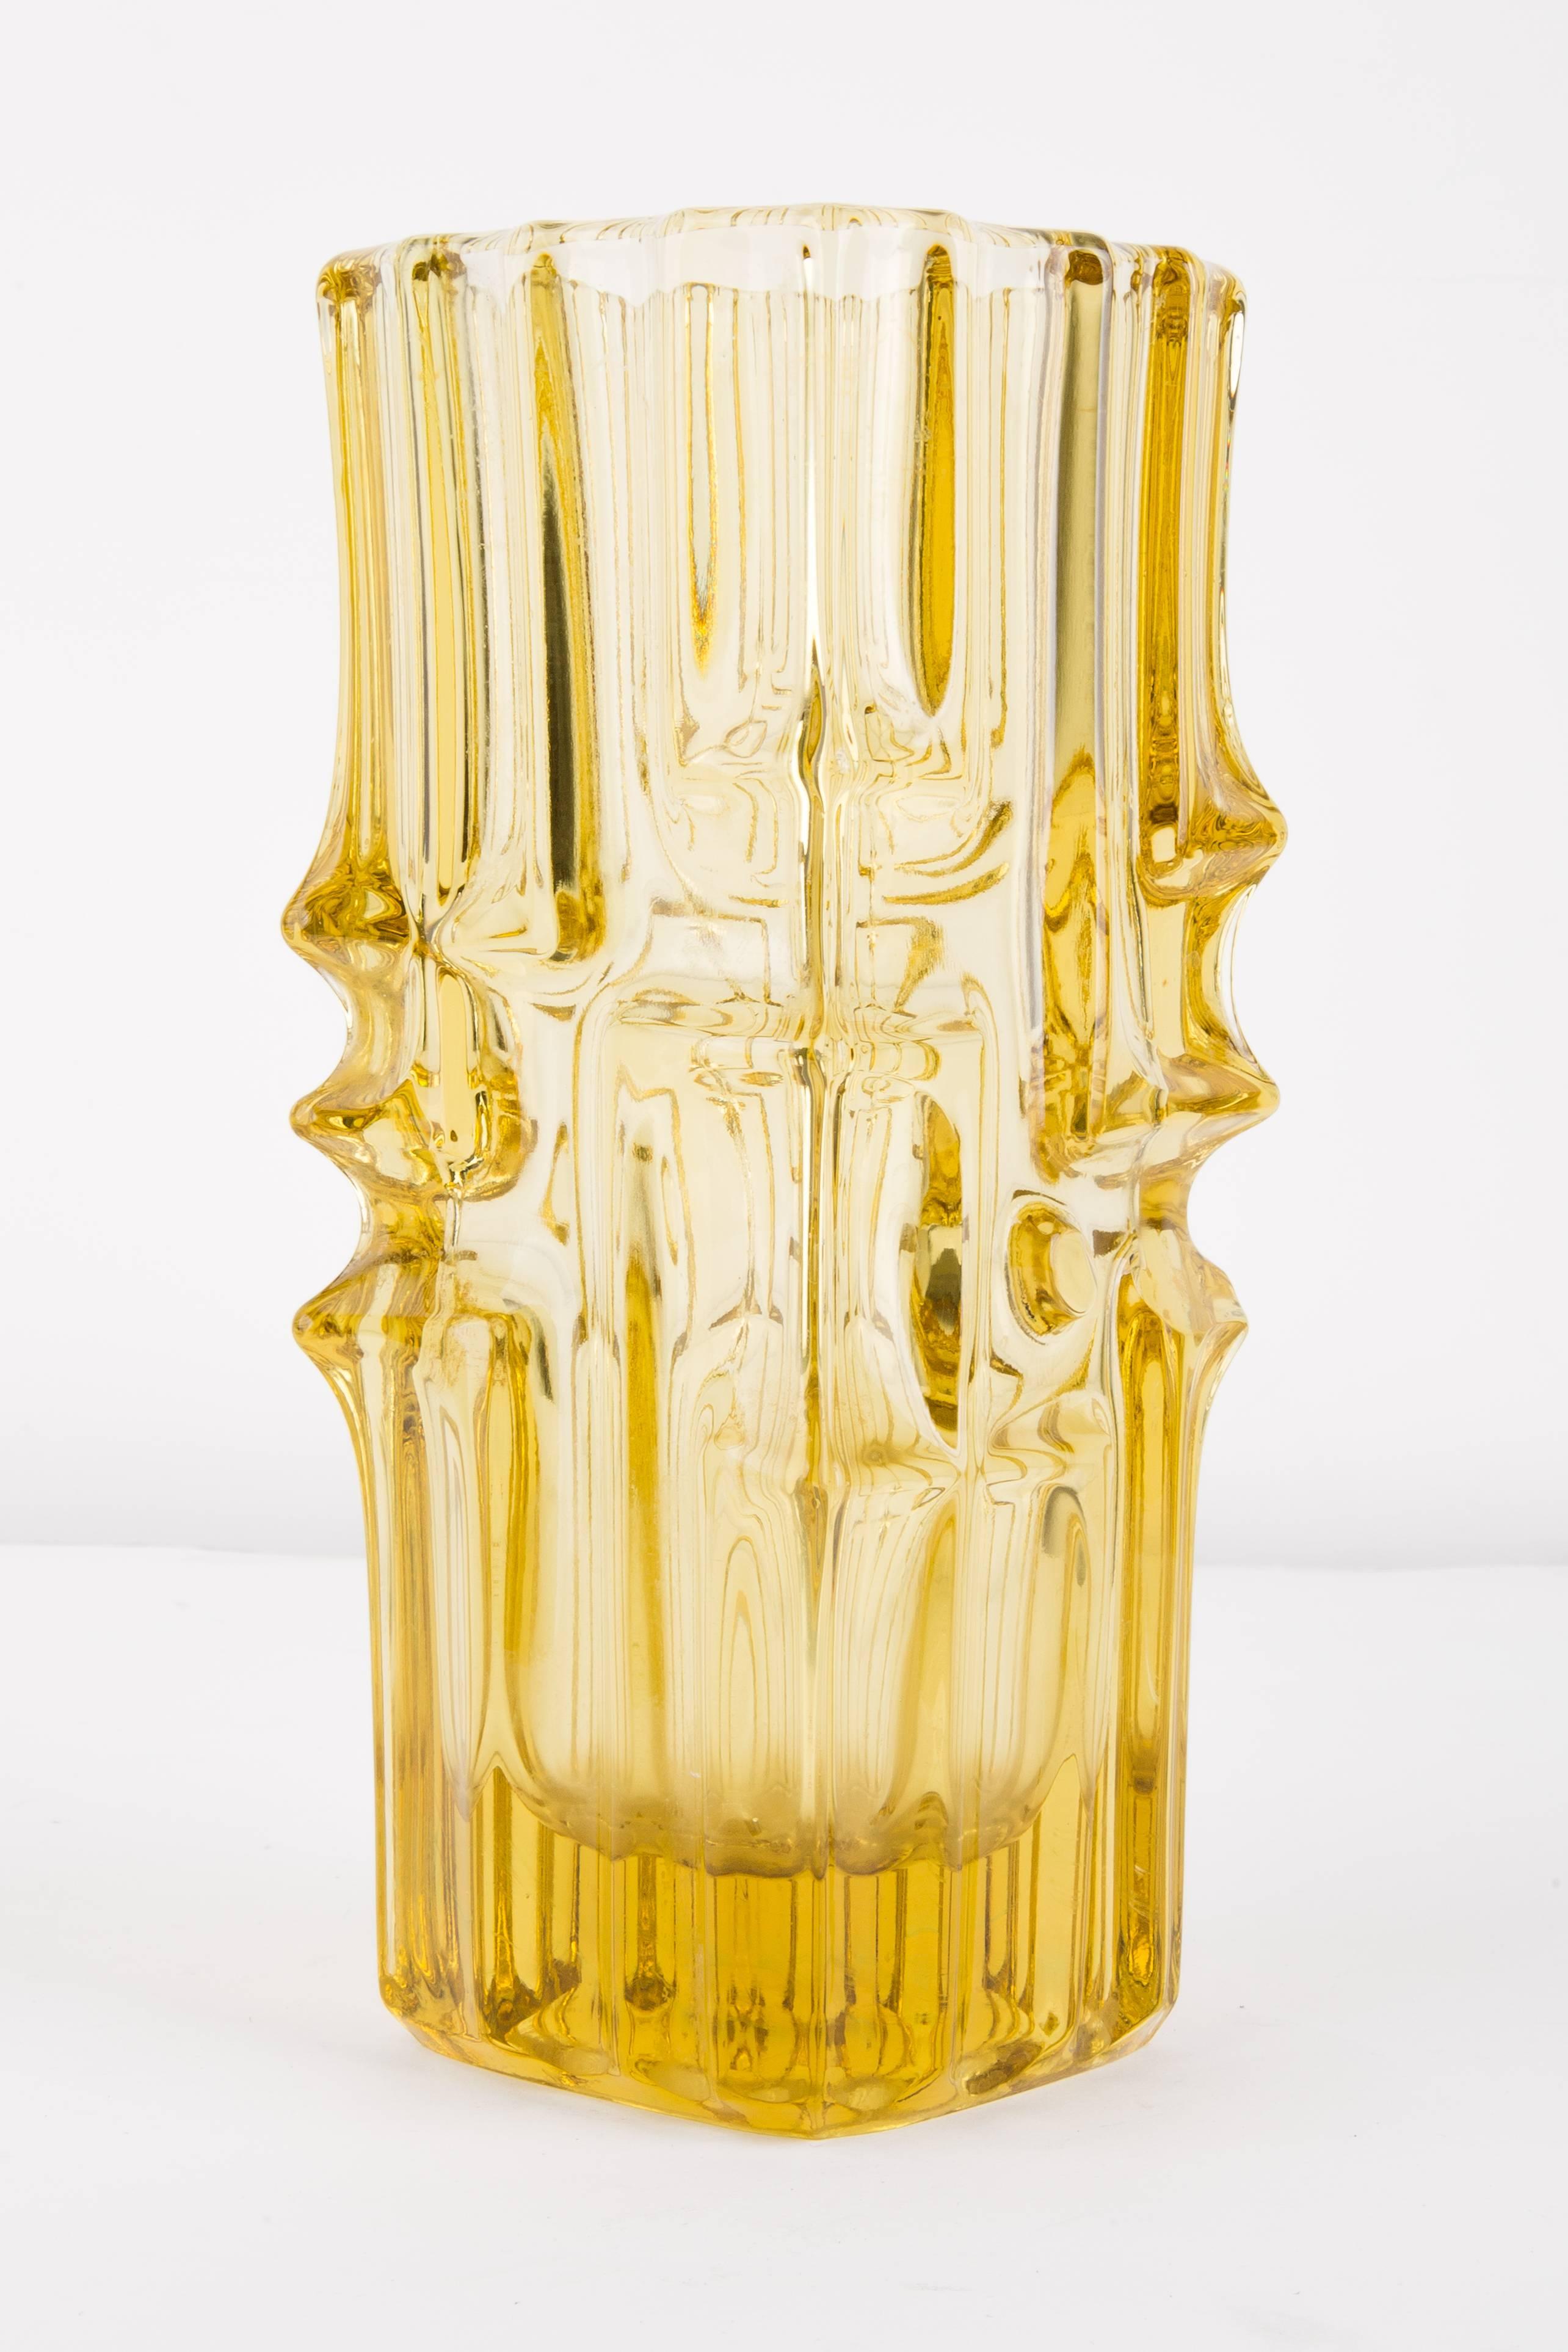 Vase formed by hand using traditional metallurgical technique. It was made of colored glass in a shade of lemon. The surface of the object with vertical grooves, which in the middle part change direction, merge and merge, giving a decorative effect.